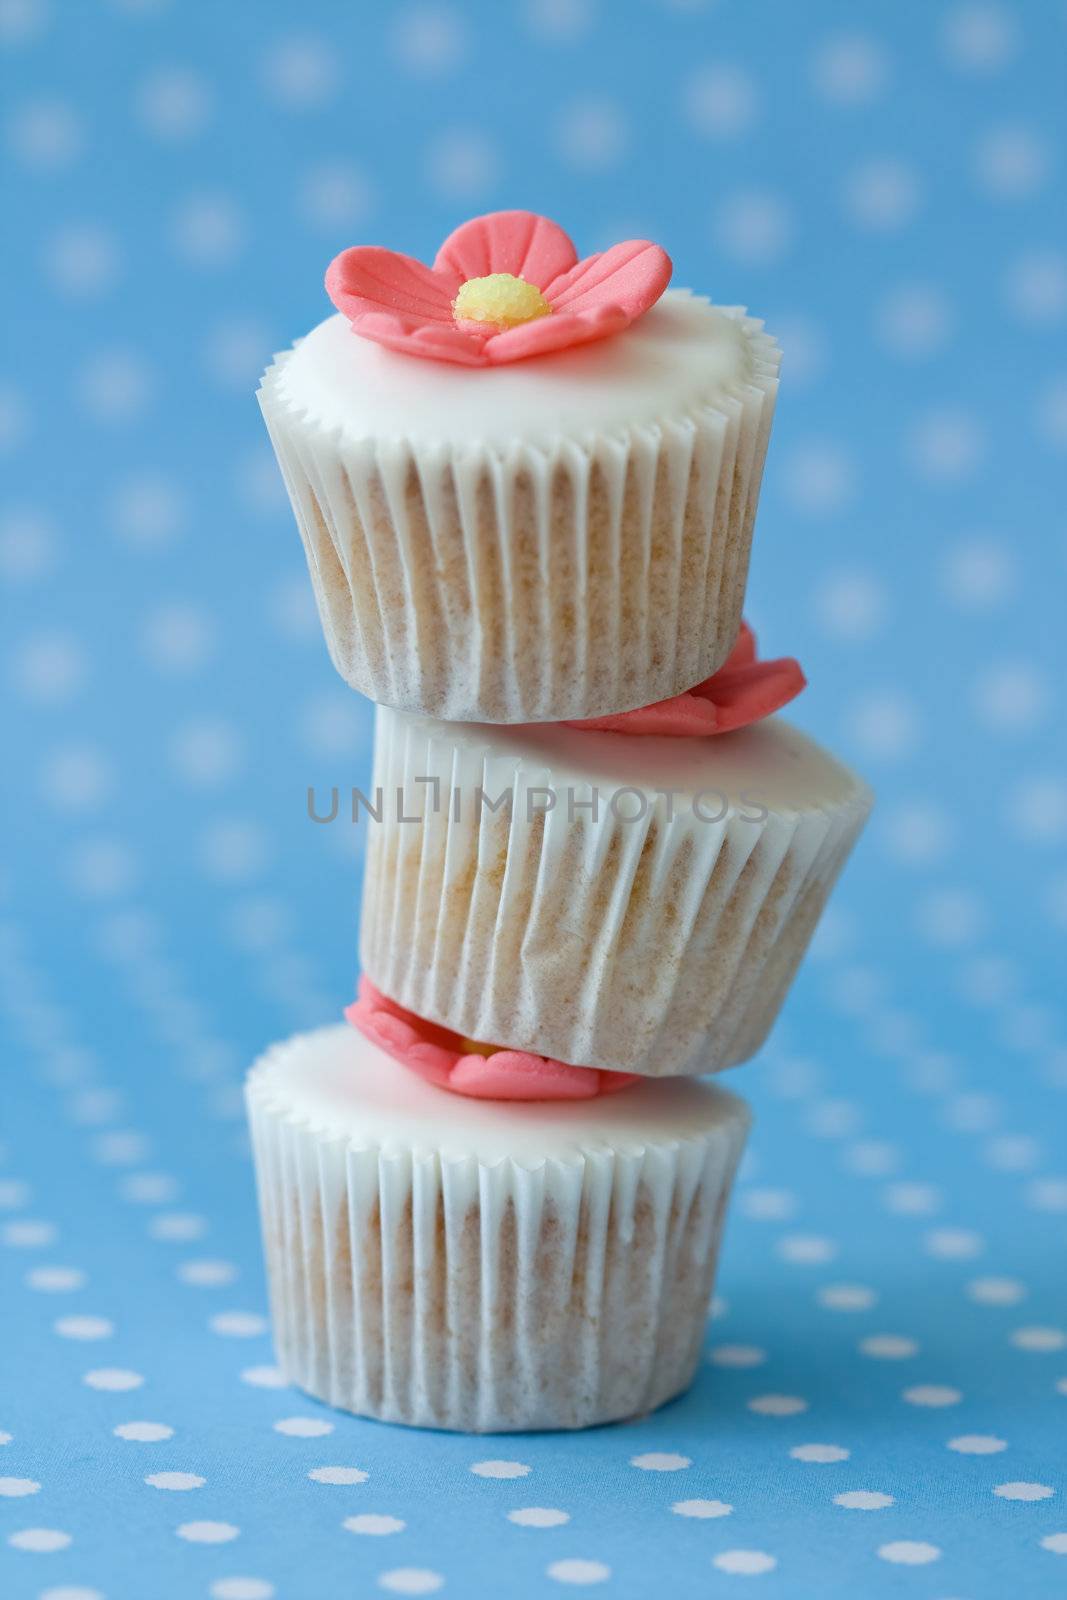 Three cupcakes arranged in a stack